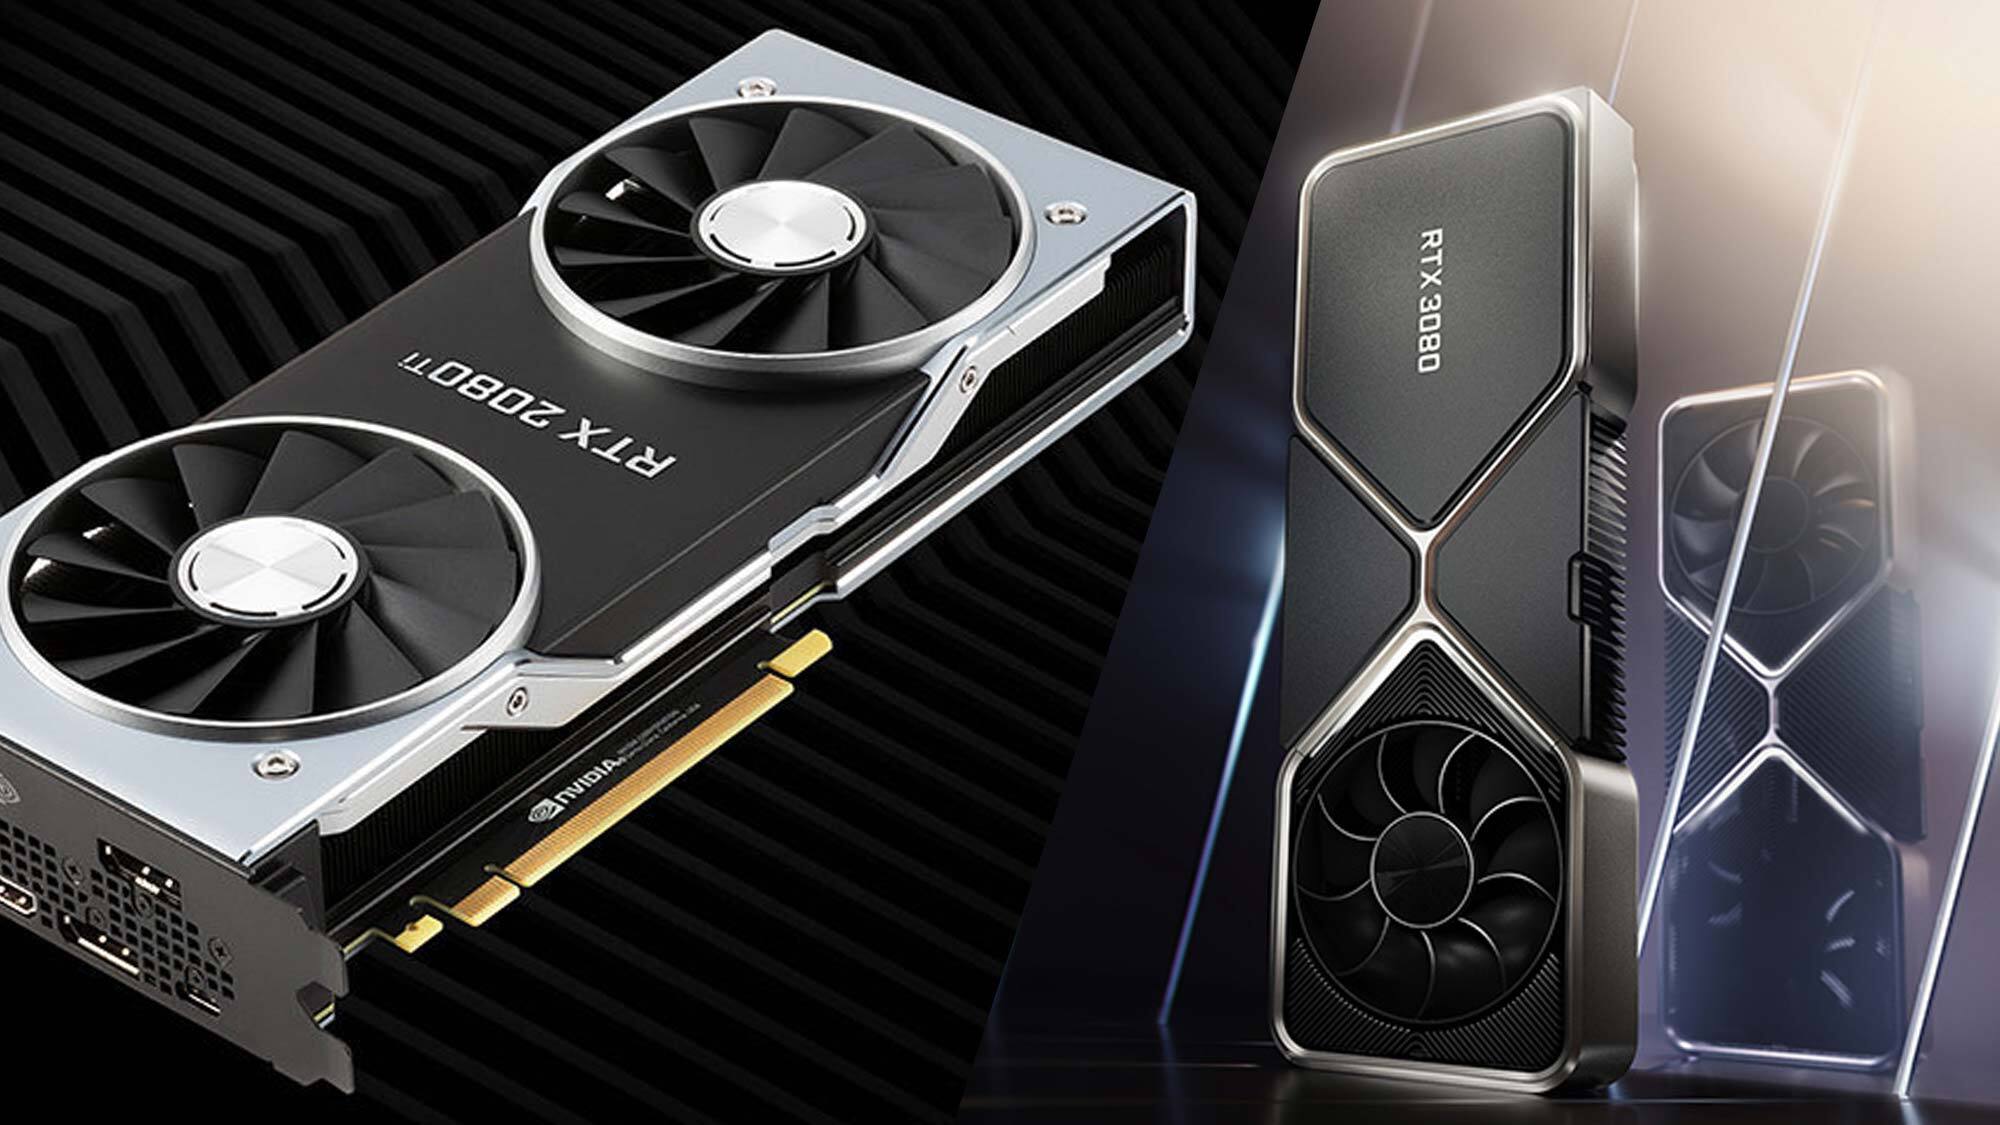 Nvidia RTX vs. RTX 2080 How much better is it? | Tom's Guide